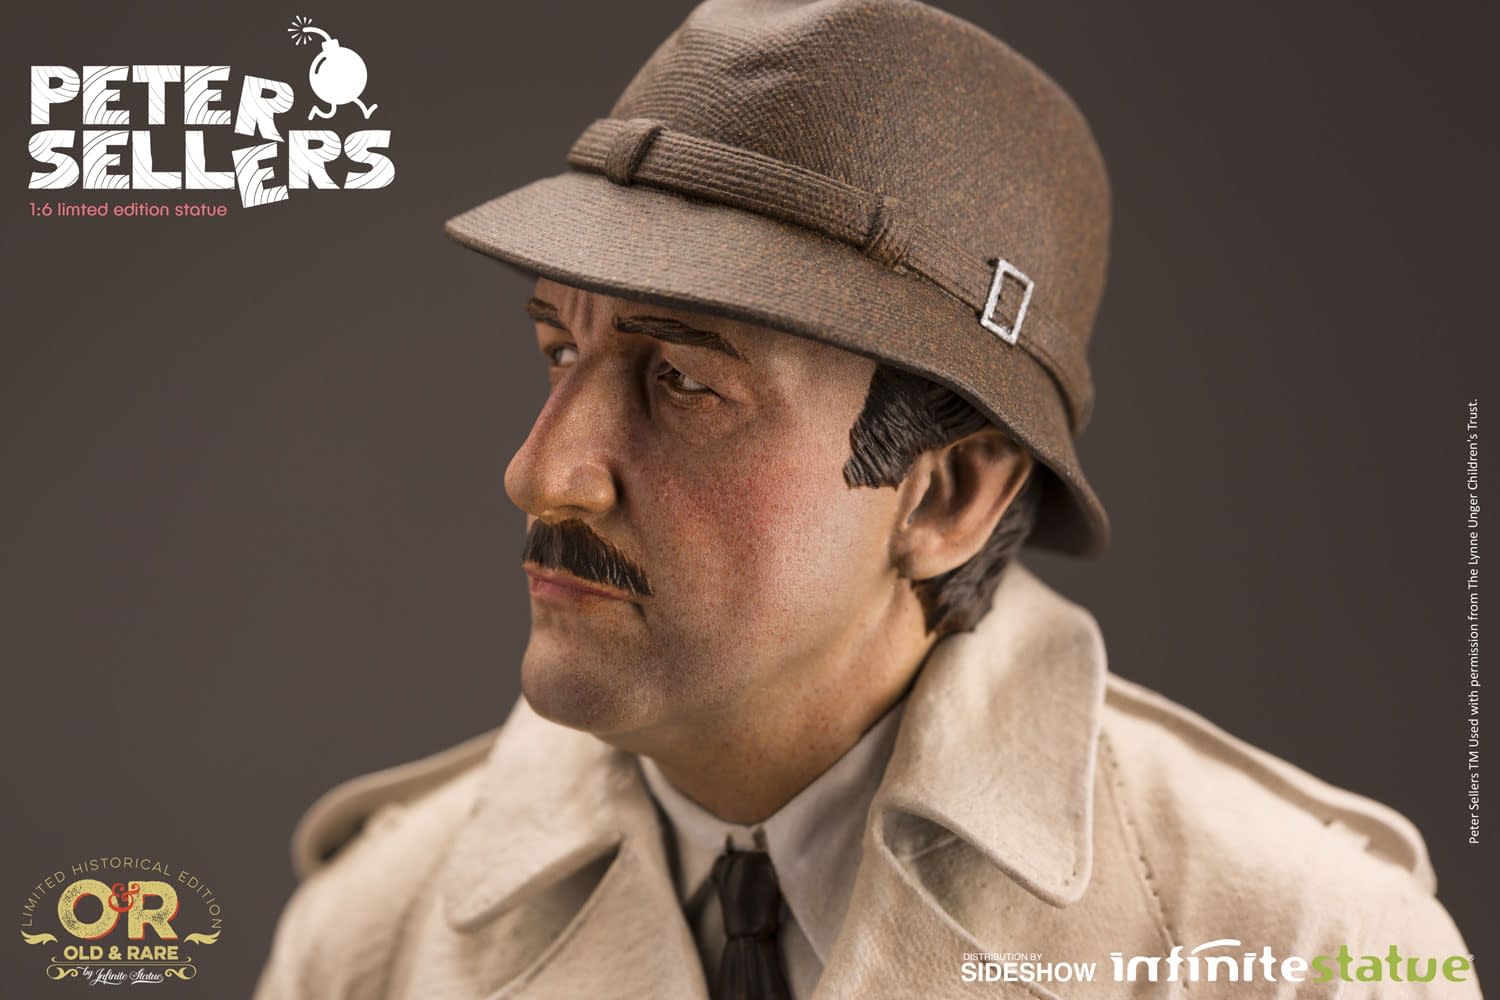 Peter Sellers Is Inspector Clouseau with New Infinite Statue Collectible